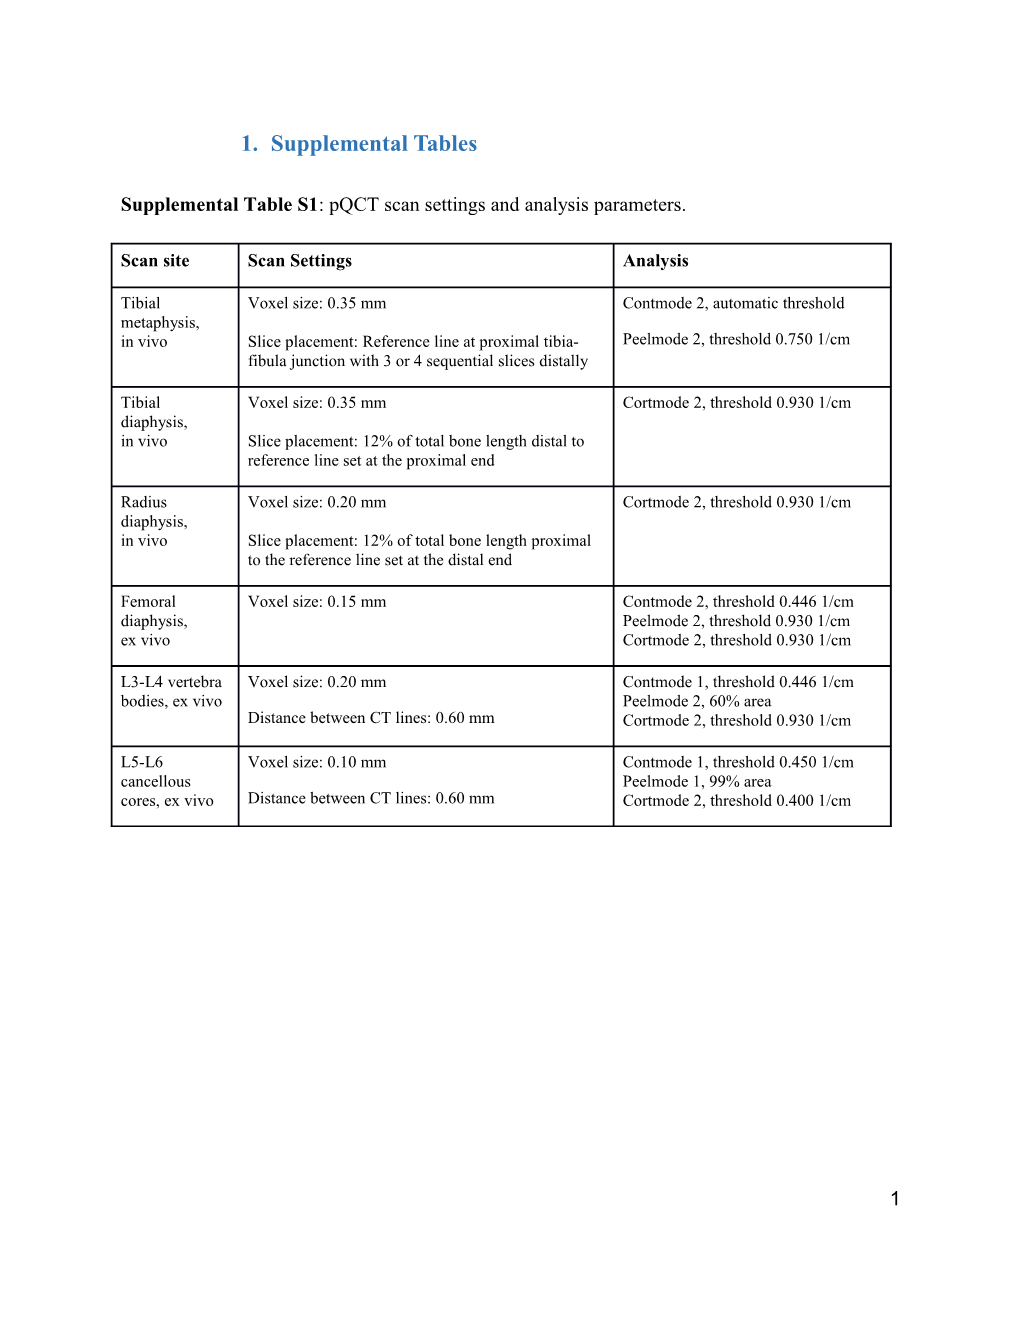 Supplemental Table S1 : Pqct Scan Settings and Analysis Parameters